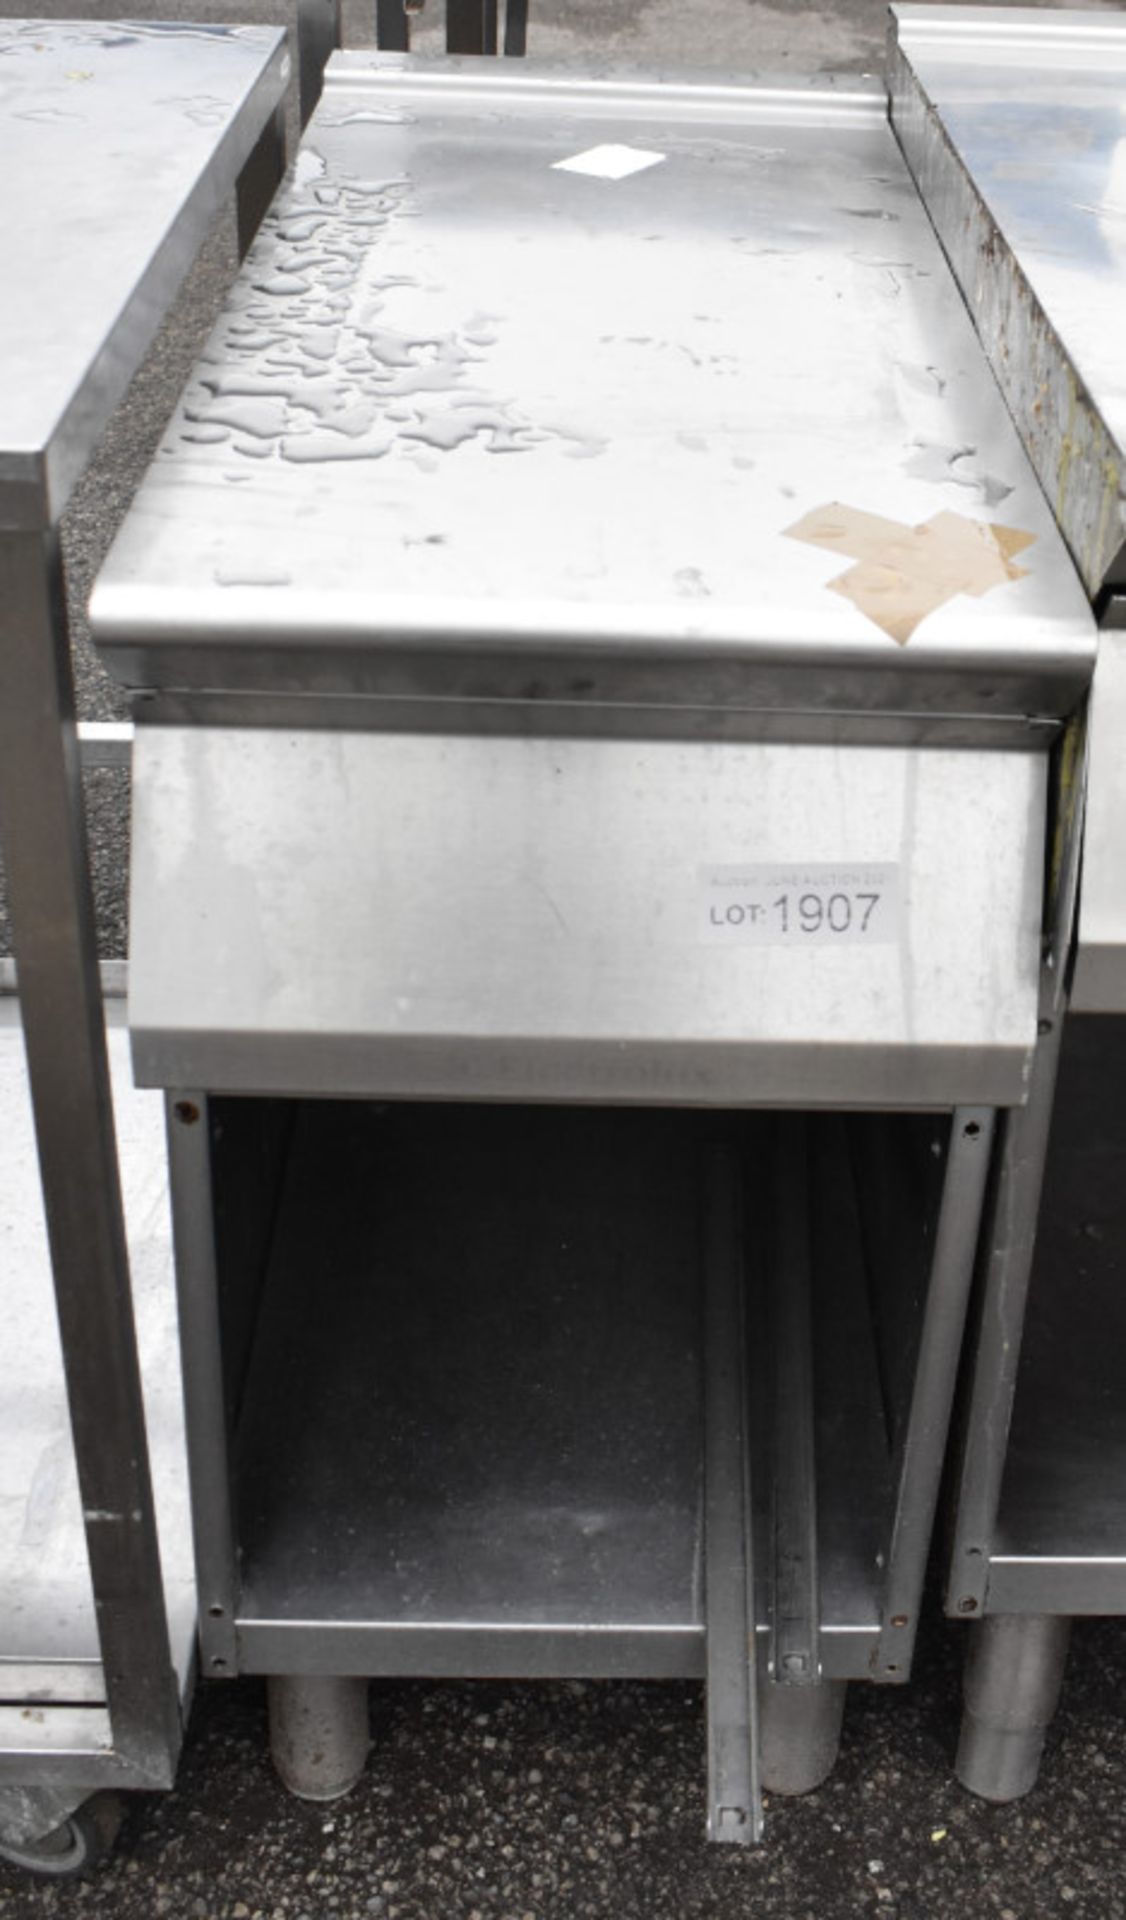 Stainless steel worktop - W 400mm x D 680mm x H 850mm